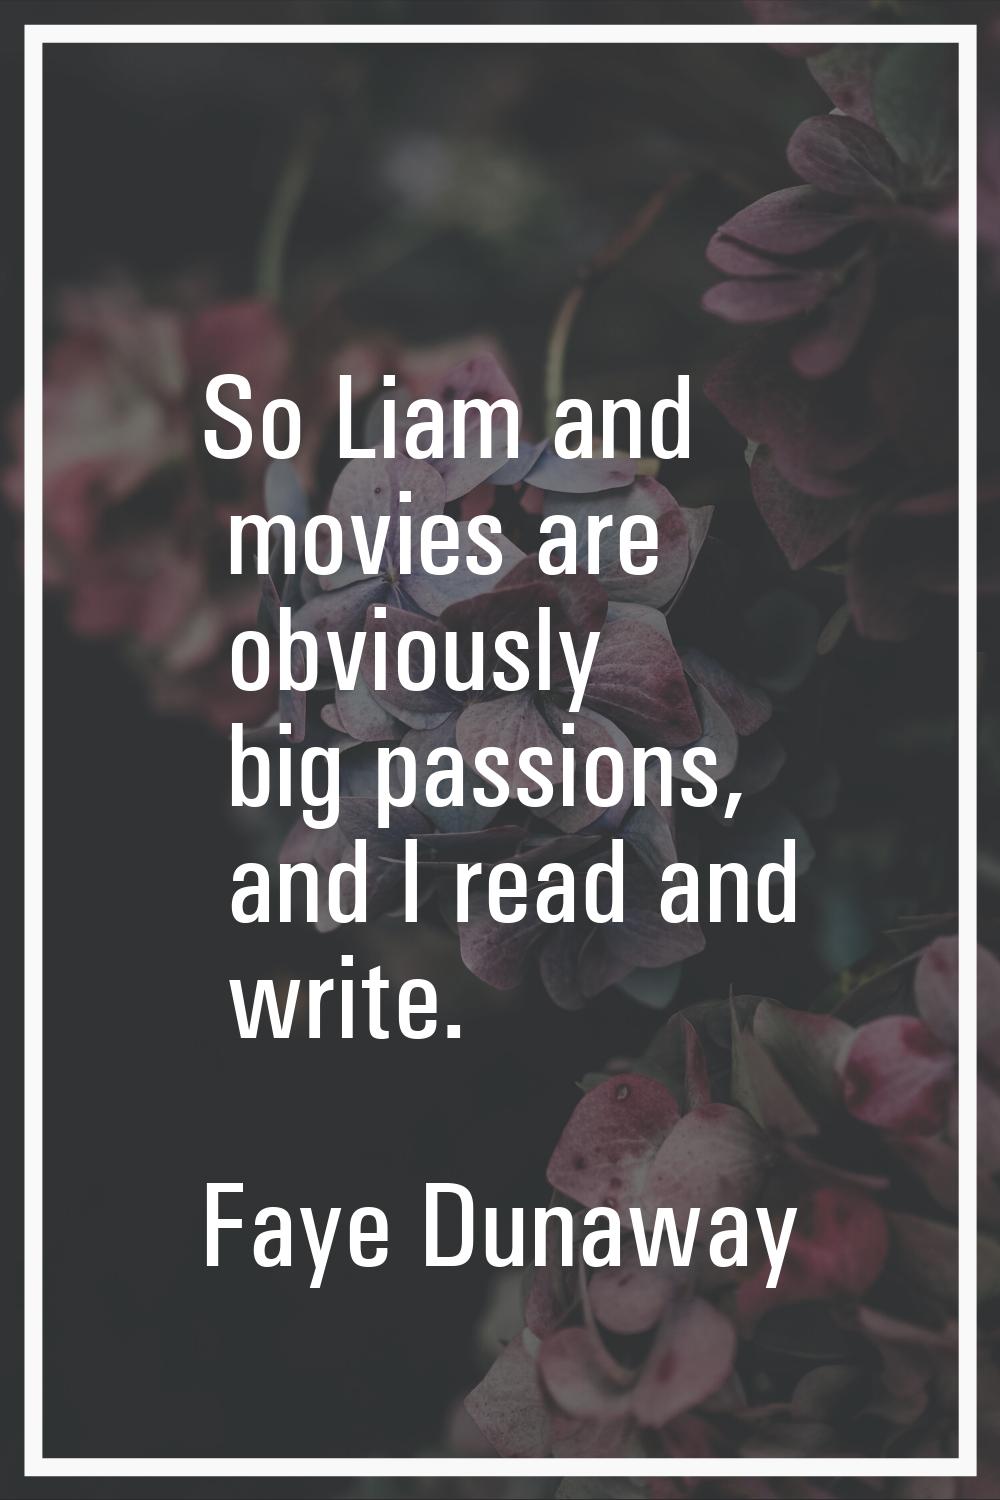 So Liam and movies are obviously big passions, and I read and write.